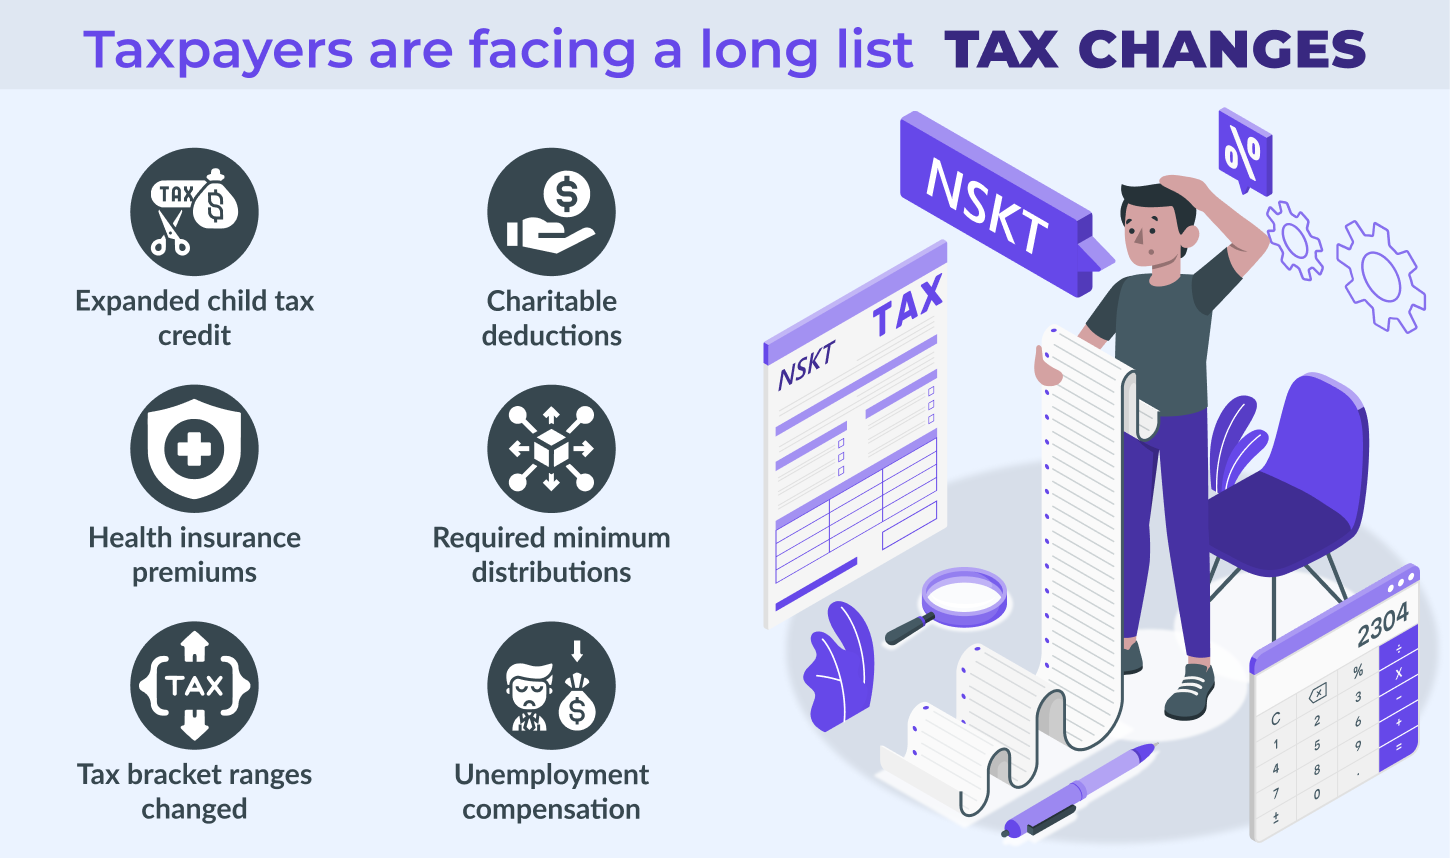 Taxpayers are facing a long list of tax changes for the 2022 tax year